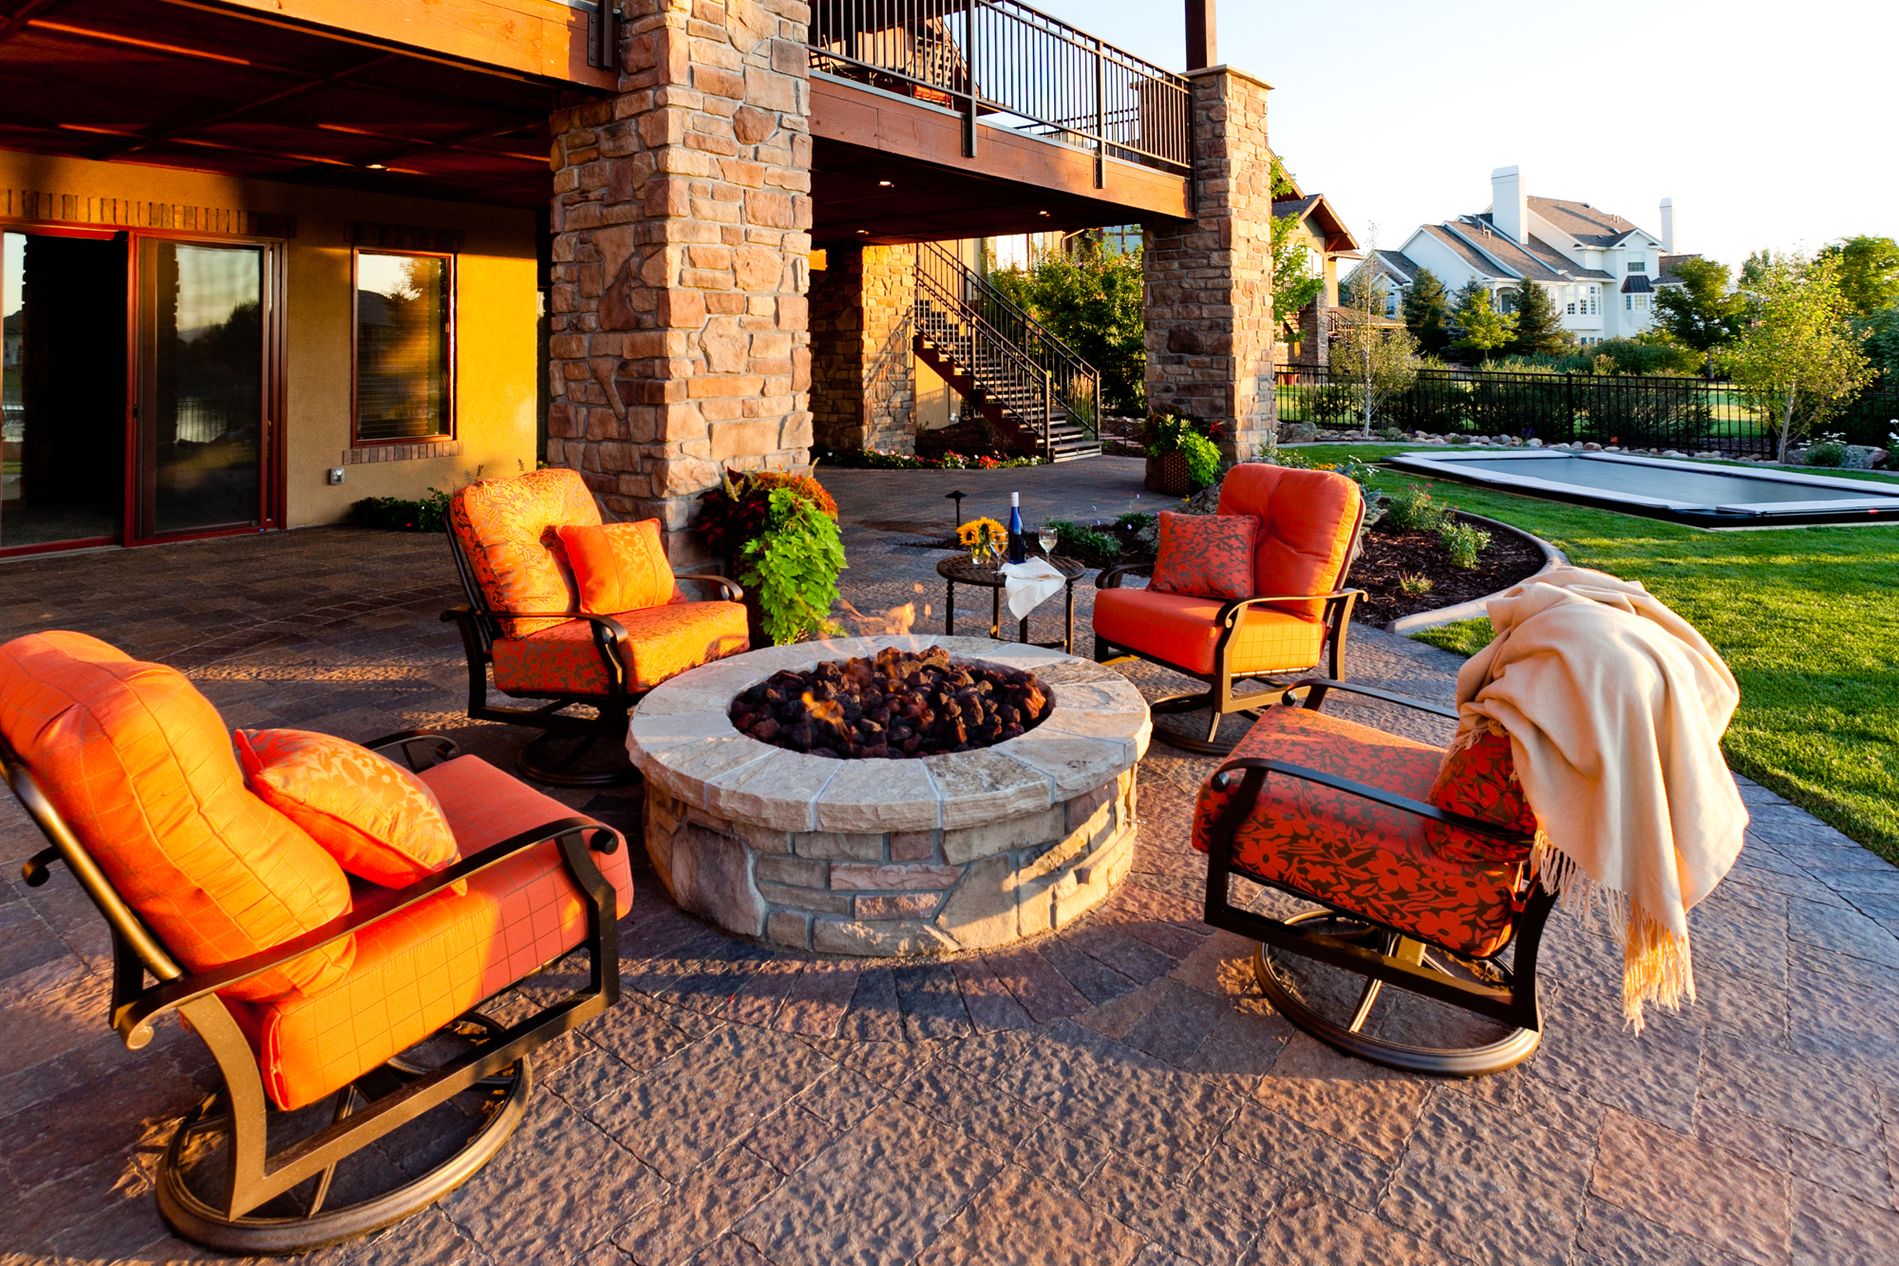 Fire Pit and Paver Patio